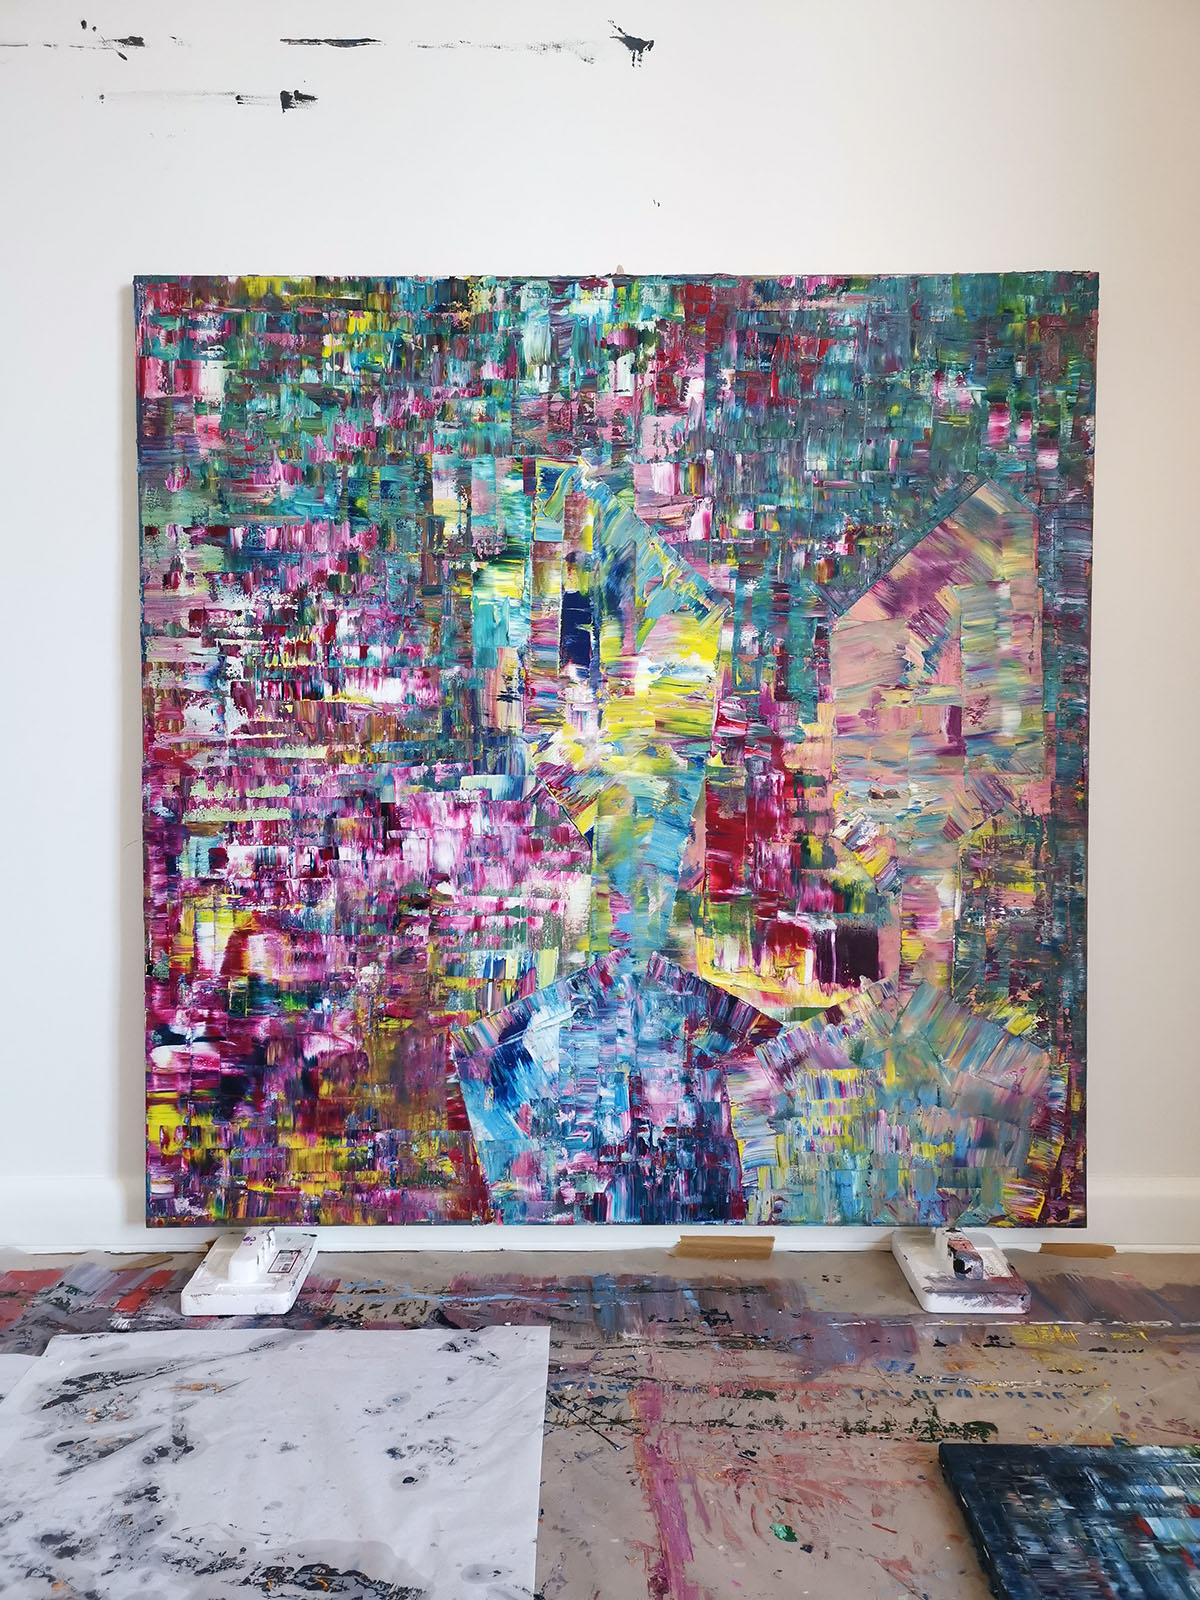 Large scale abstract painting hanging on a studio wall